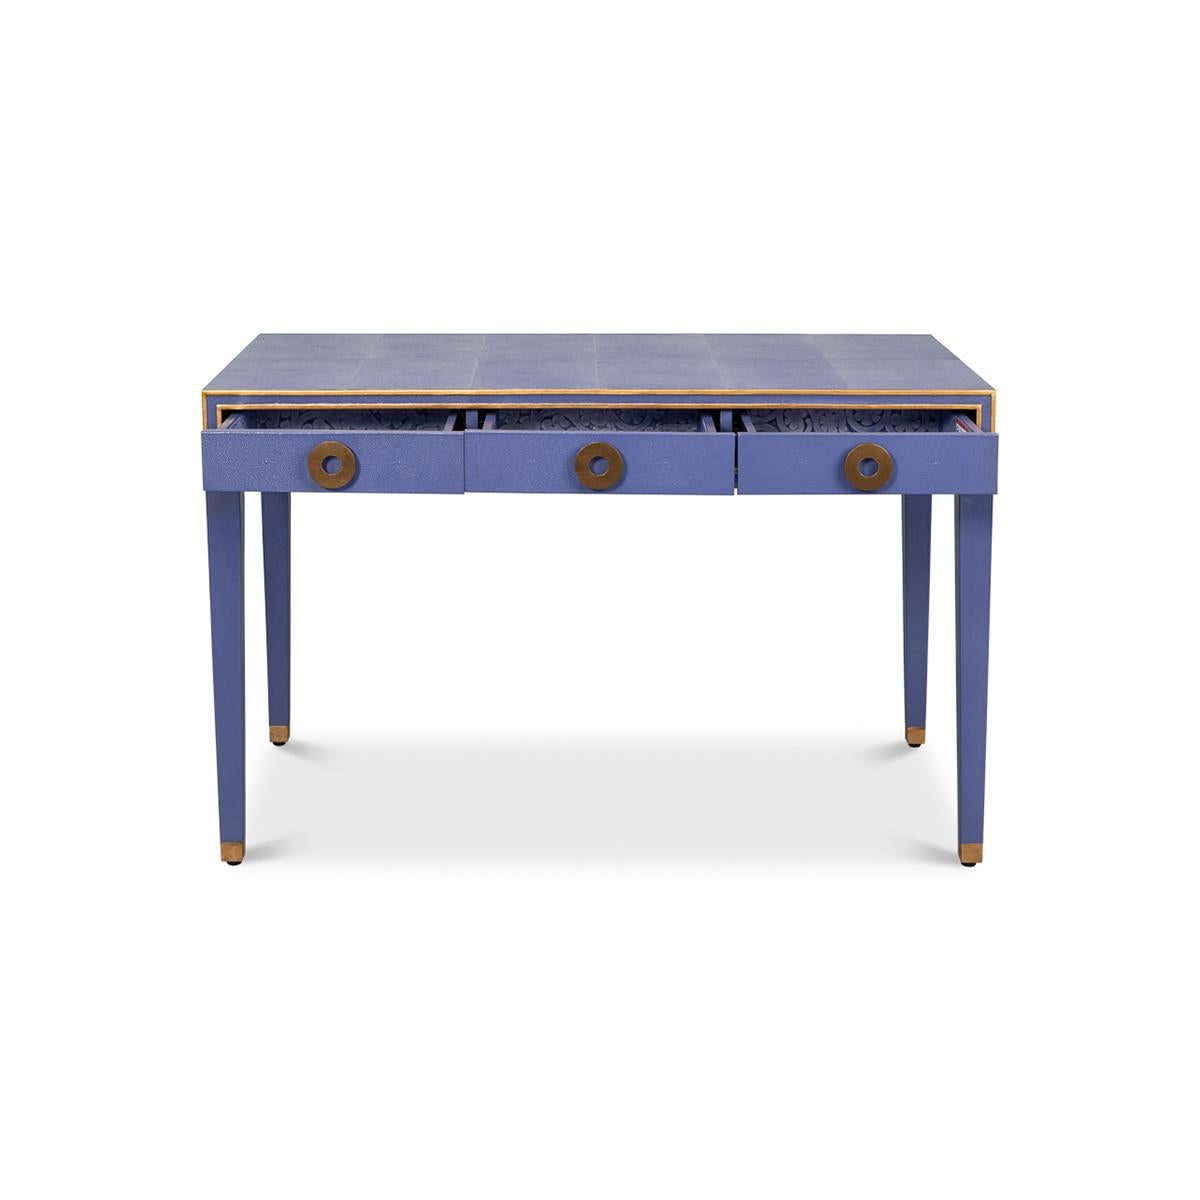 Asian Art Deco Leather Desk In Marlin Blue For Sale